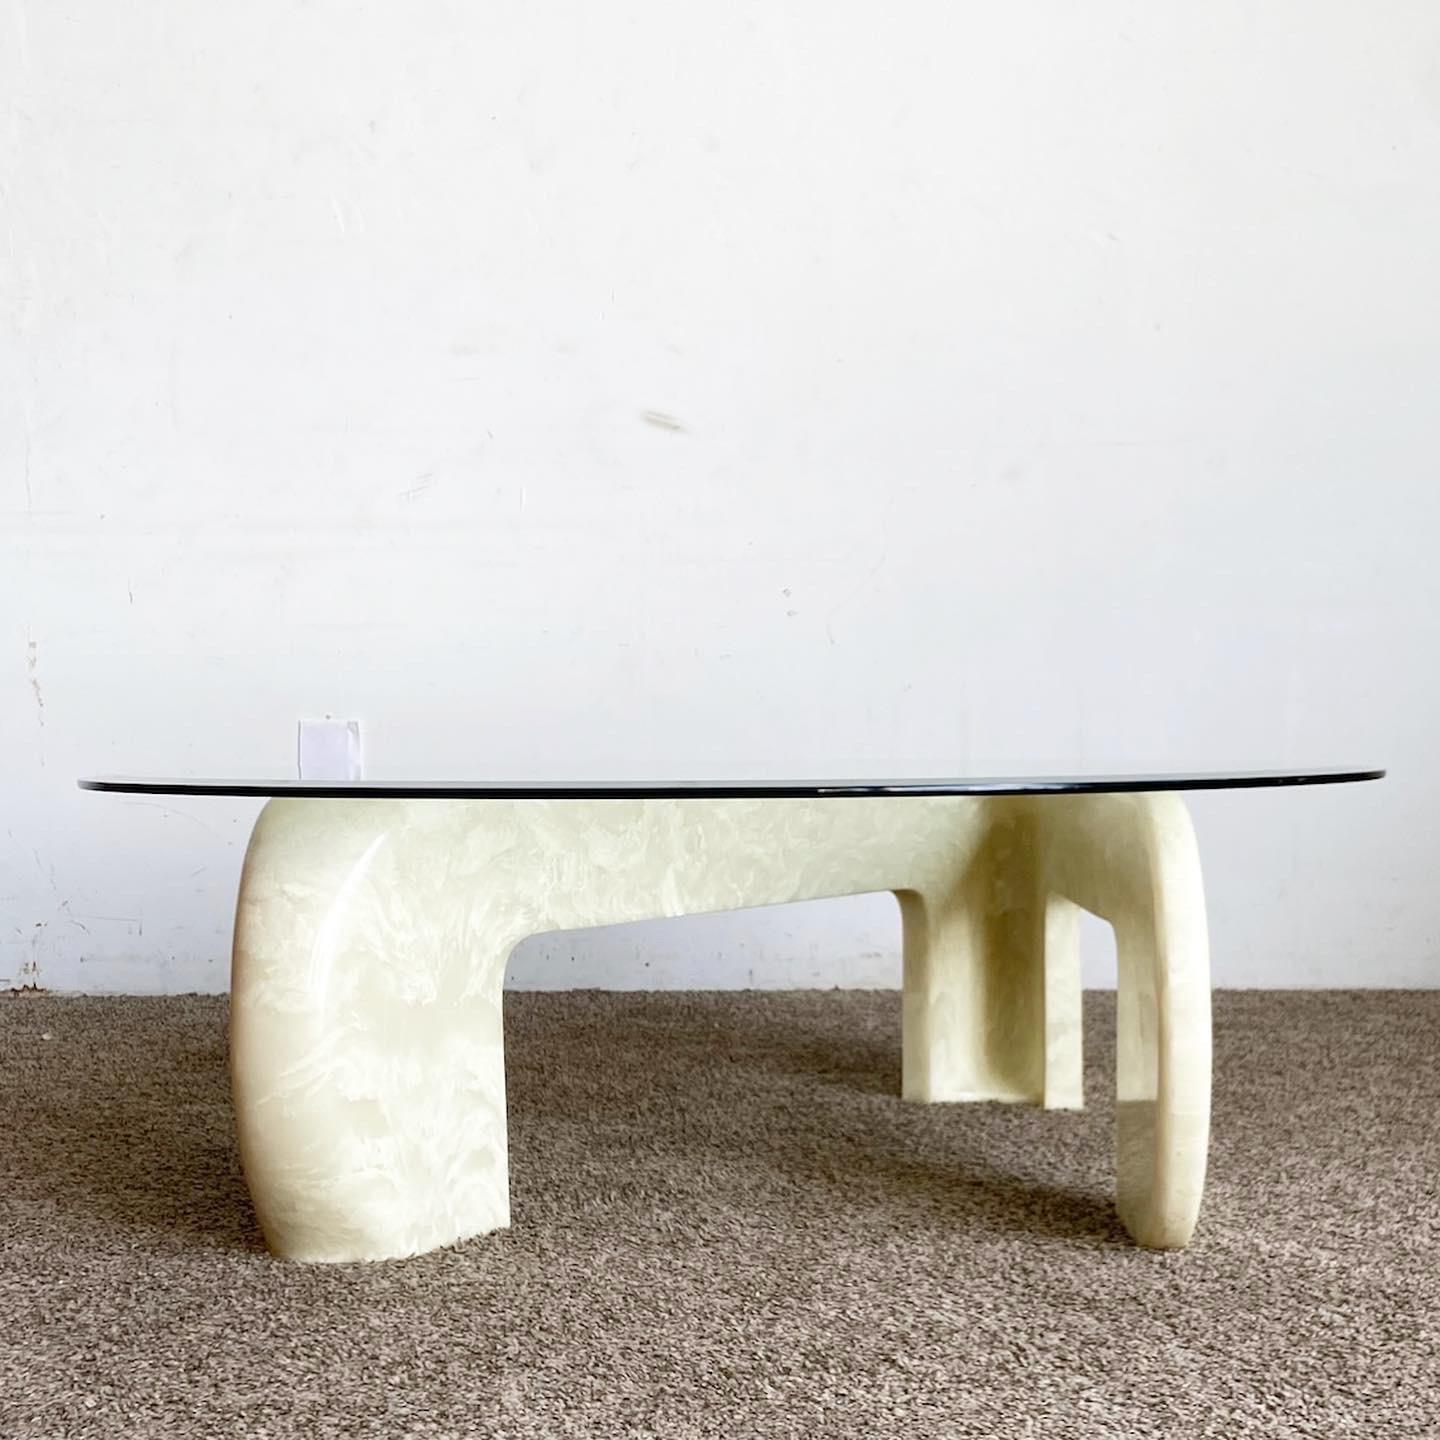 Postmodern Faux Marble Z Table in fiberglass ‚Äì a sleek glass top meets an artfully crafted Z-shaped base for a distinctive touch in contemporary spaces.

Faux Marble Z Table capturing postmodern design essence.
Durable fiberglass base artfully